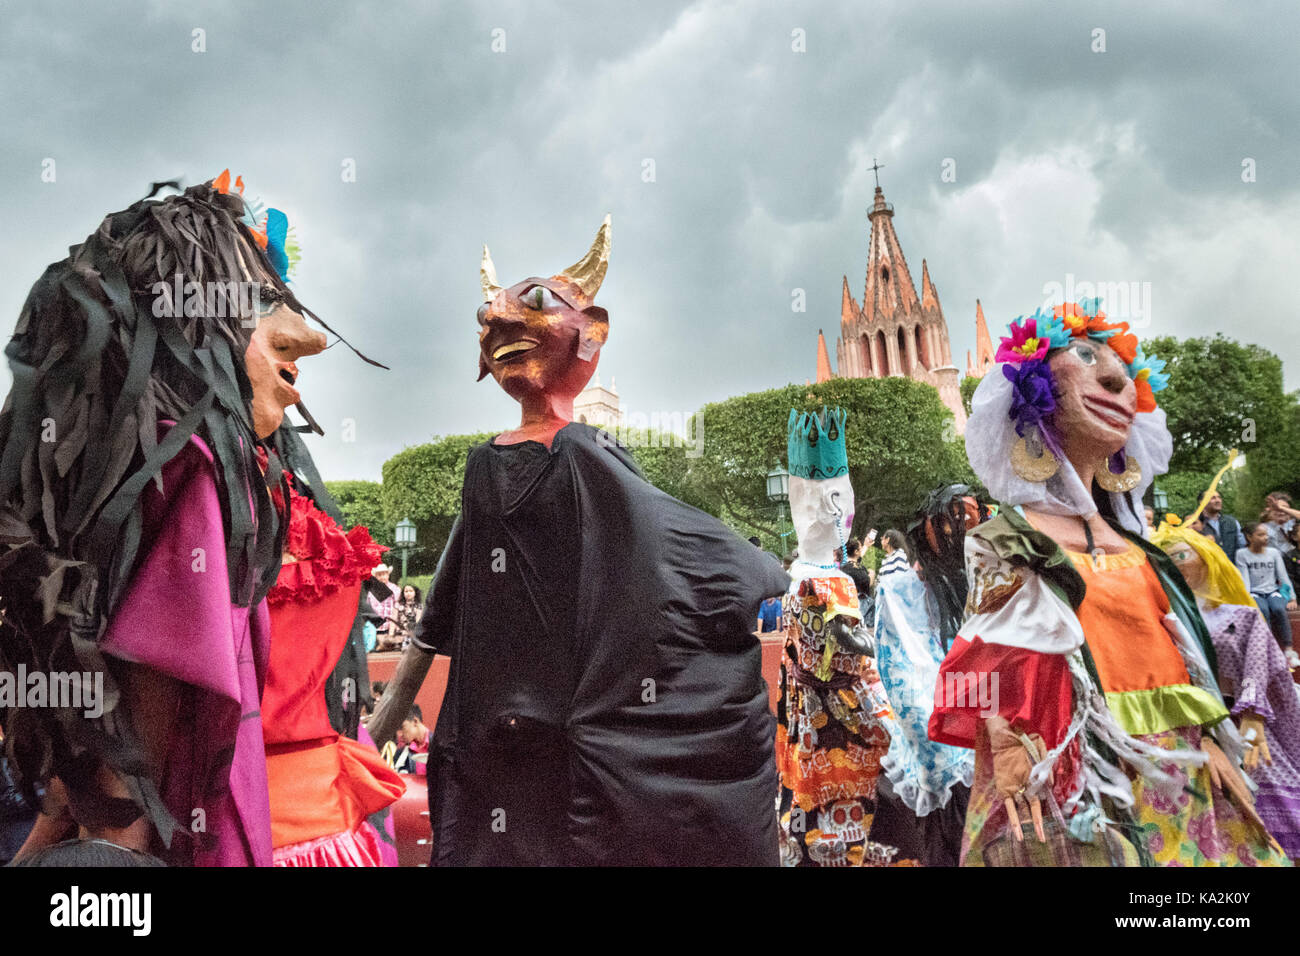 A parade of giant paper-mache puppets called mojigangas dance in a procession through the city at the start of the week long fiesta of the patron saint Saint Michael September 22, 2017 in San Miguel de Allende, Mexico. Stock Photo